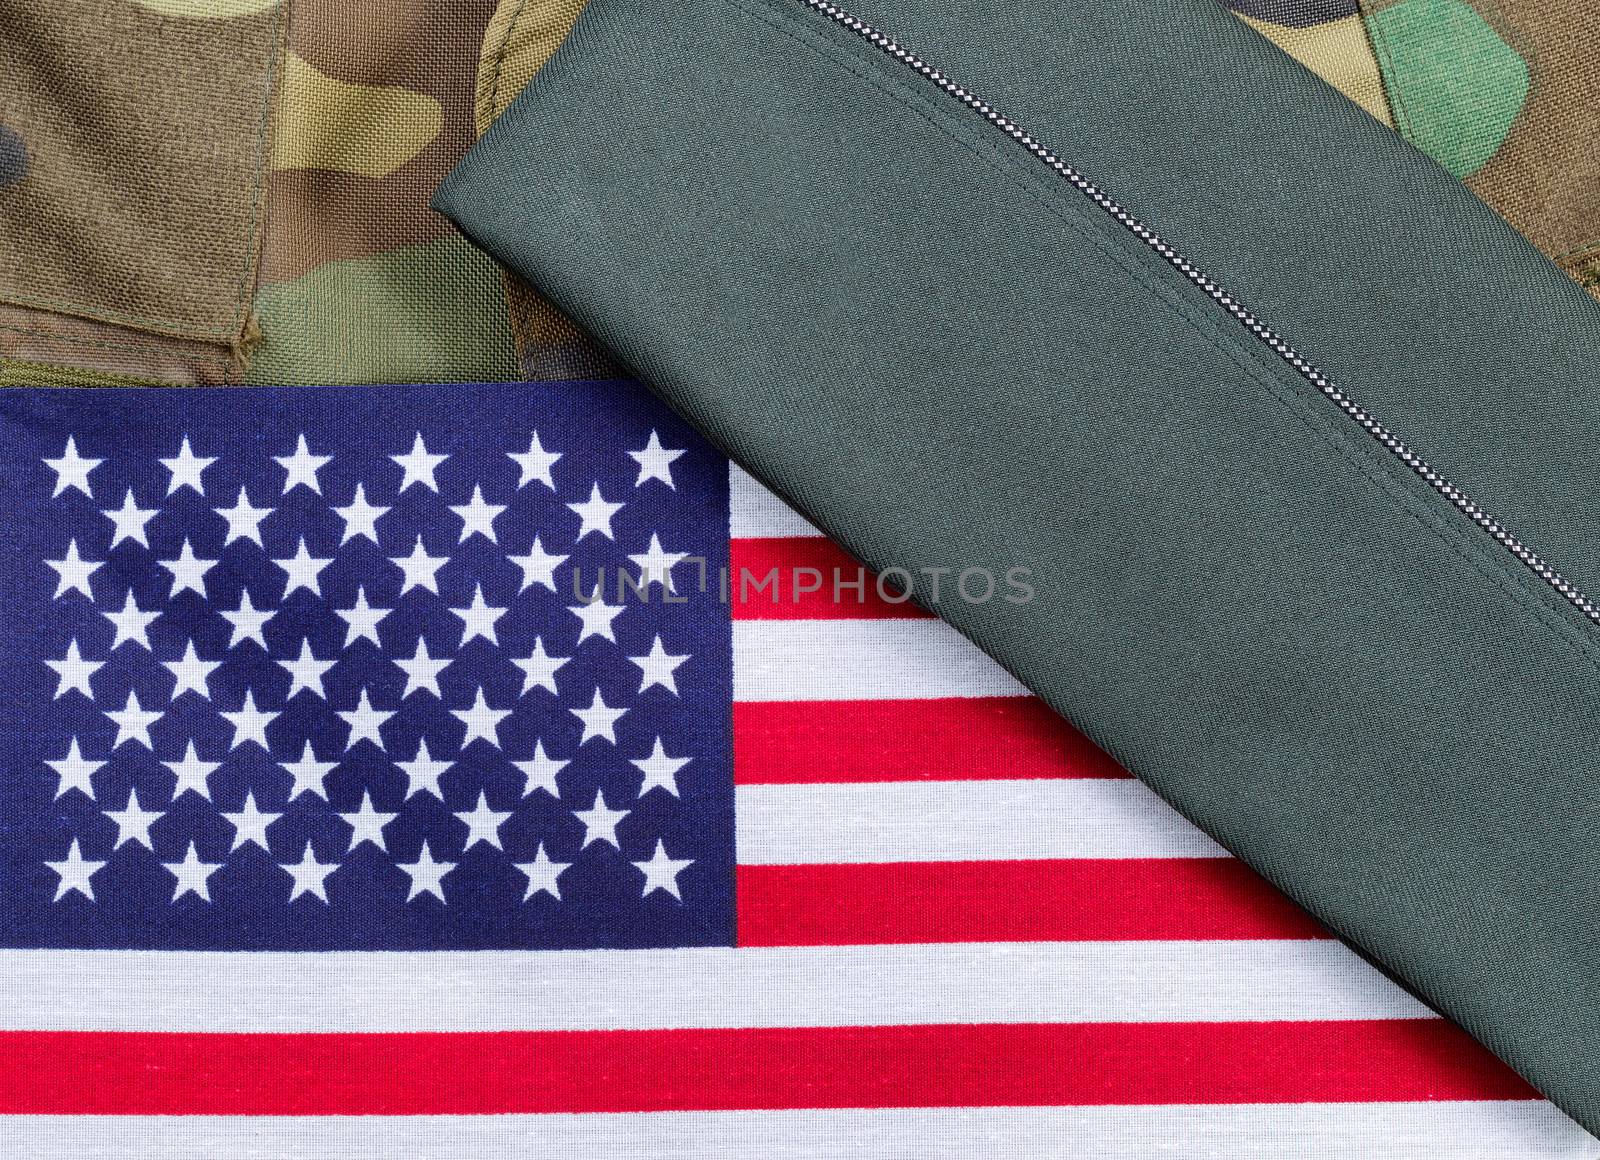 American Military Uniform with Flag and Cap  by tab1962